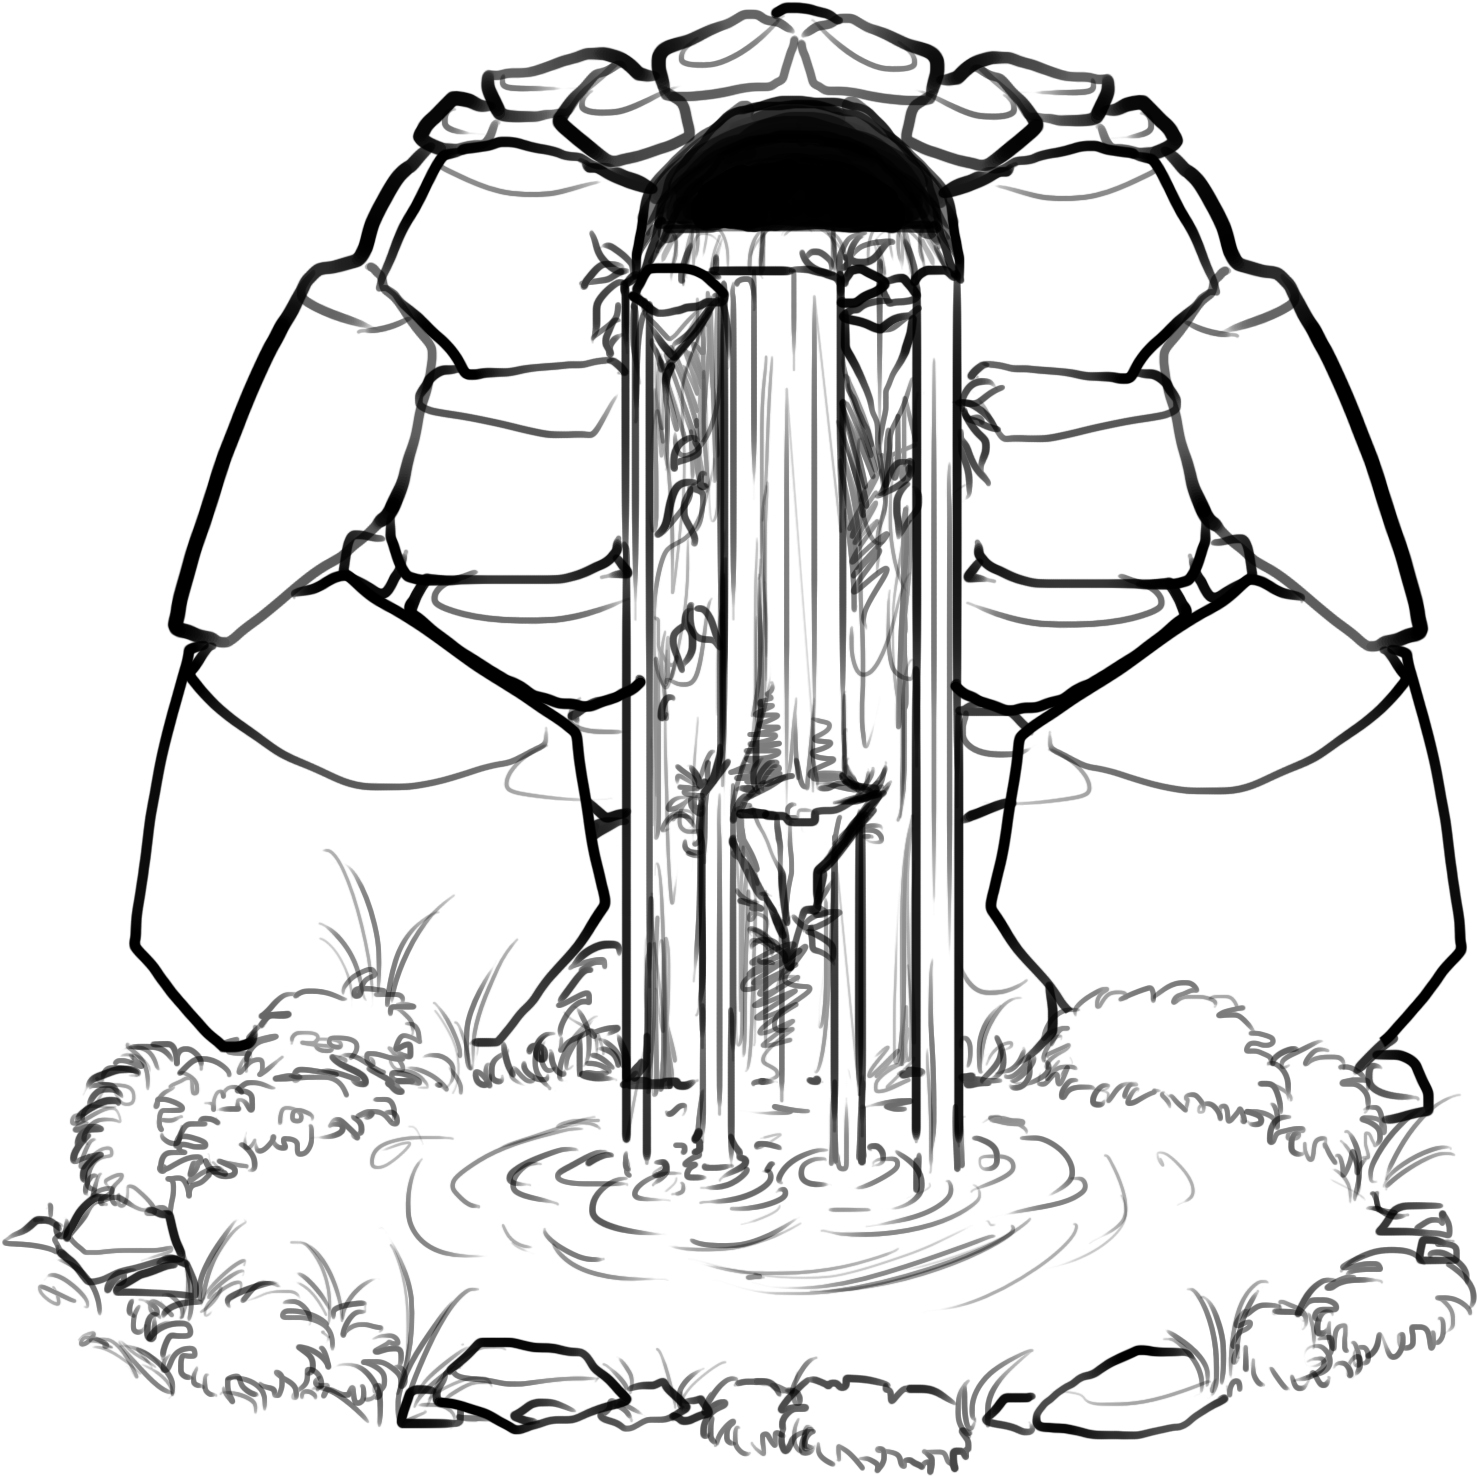 Waterfall and Pool Coloring Pages